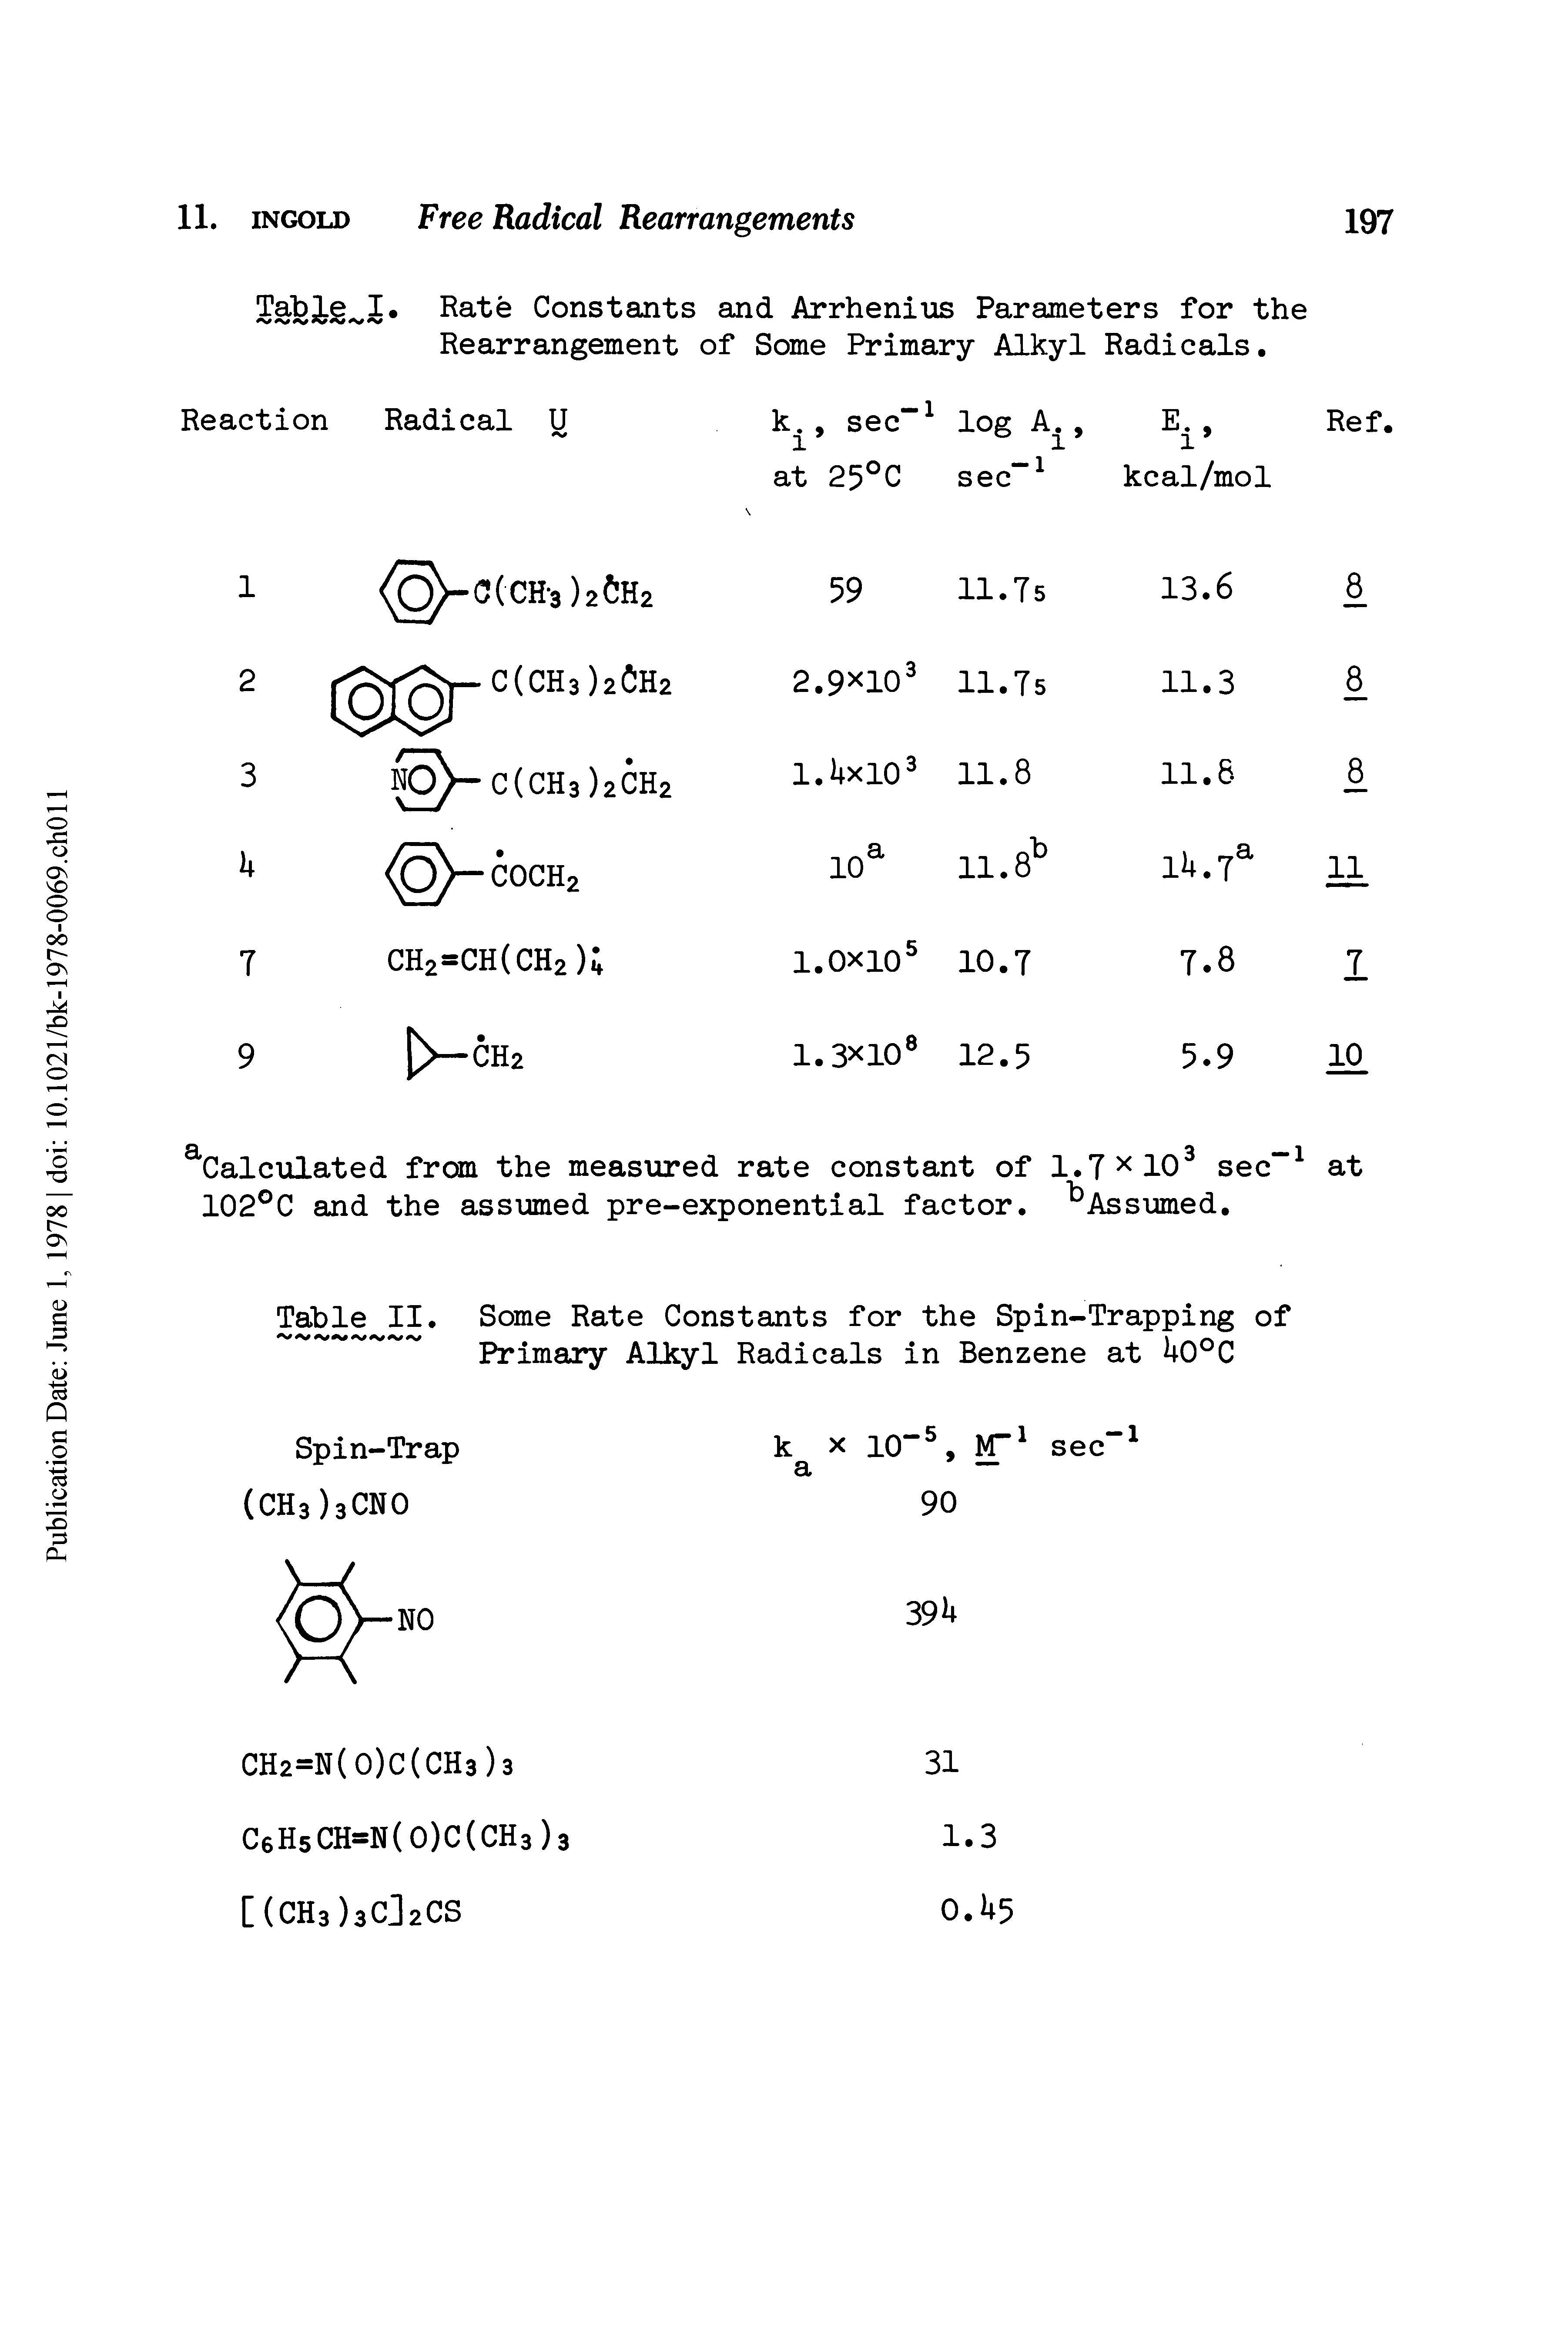 Table II. Some Rate Constants for the Spin-Trapping of Primary Alkyl Radicals in Benzene at i+0°C...